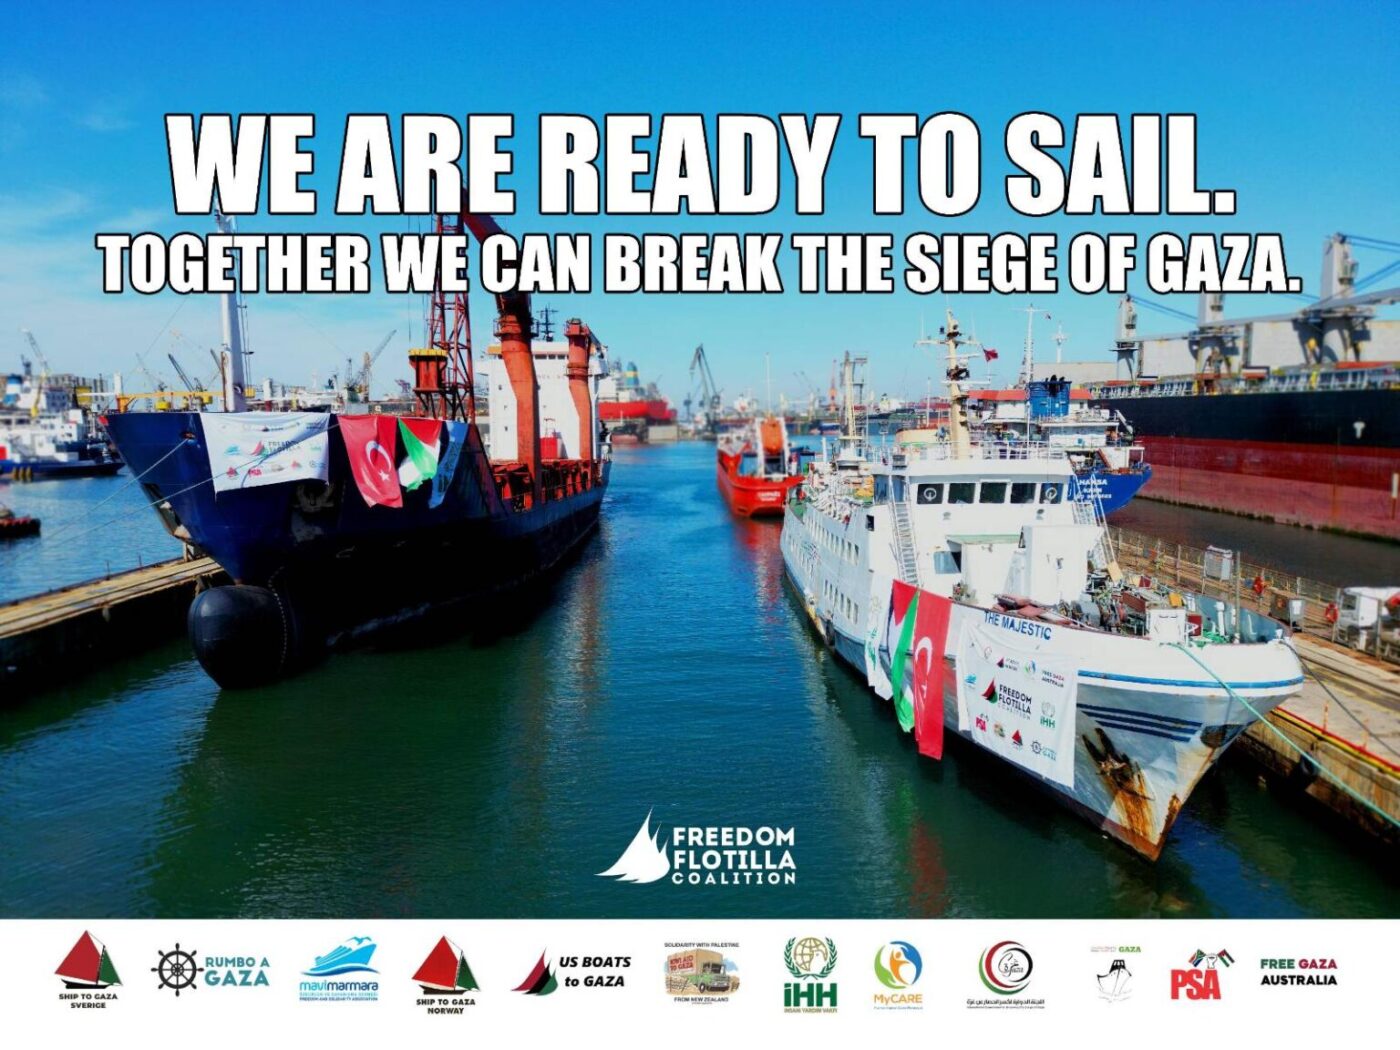 We-are-ready-to-sail.-Together-we-can-break-the-siege-of-Gaza-poster-by-Freedom-Flotilla-Coalition-1-1400x1050, International civilian aid flotilla to break the siege of Gaza, Featured World News & Views 